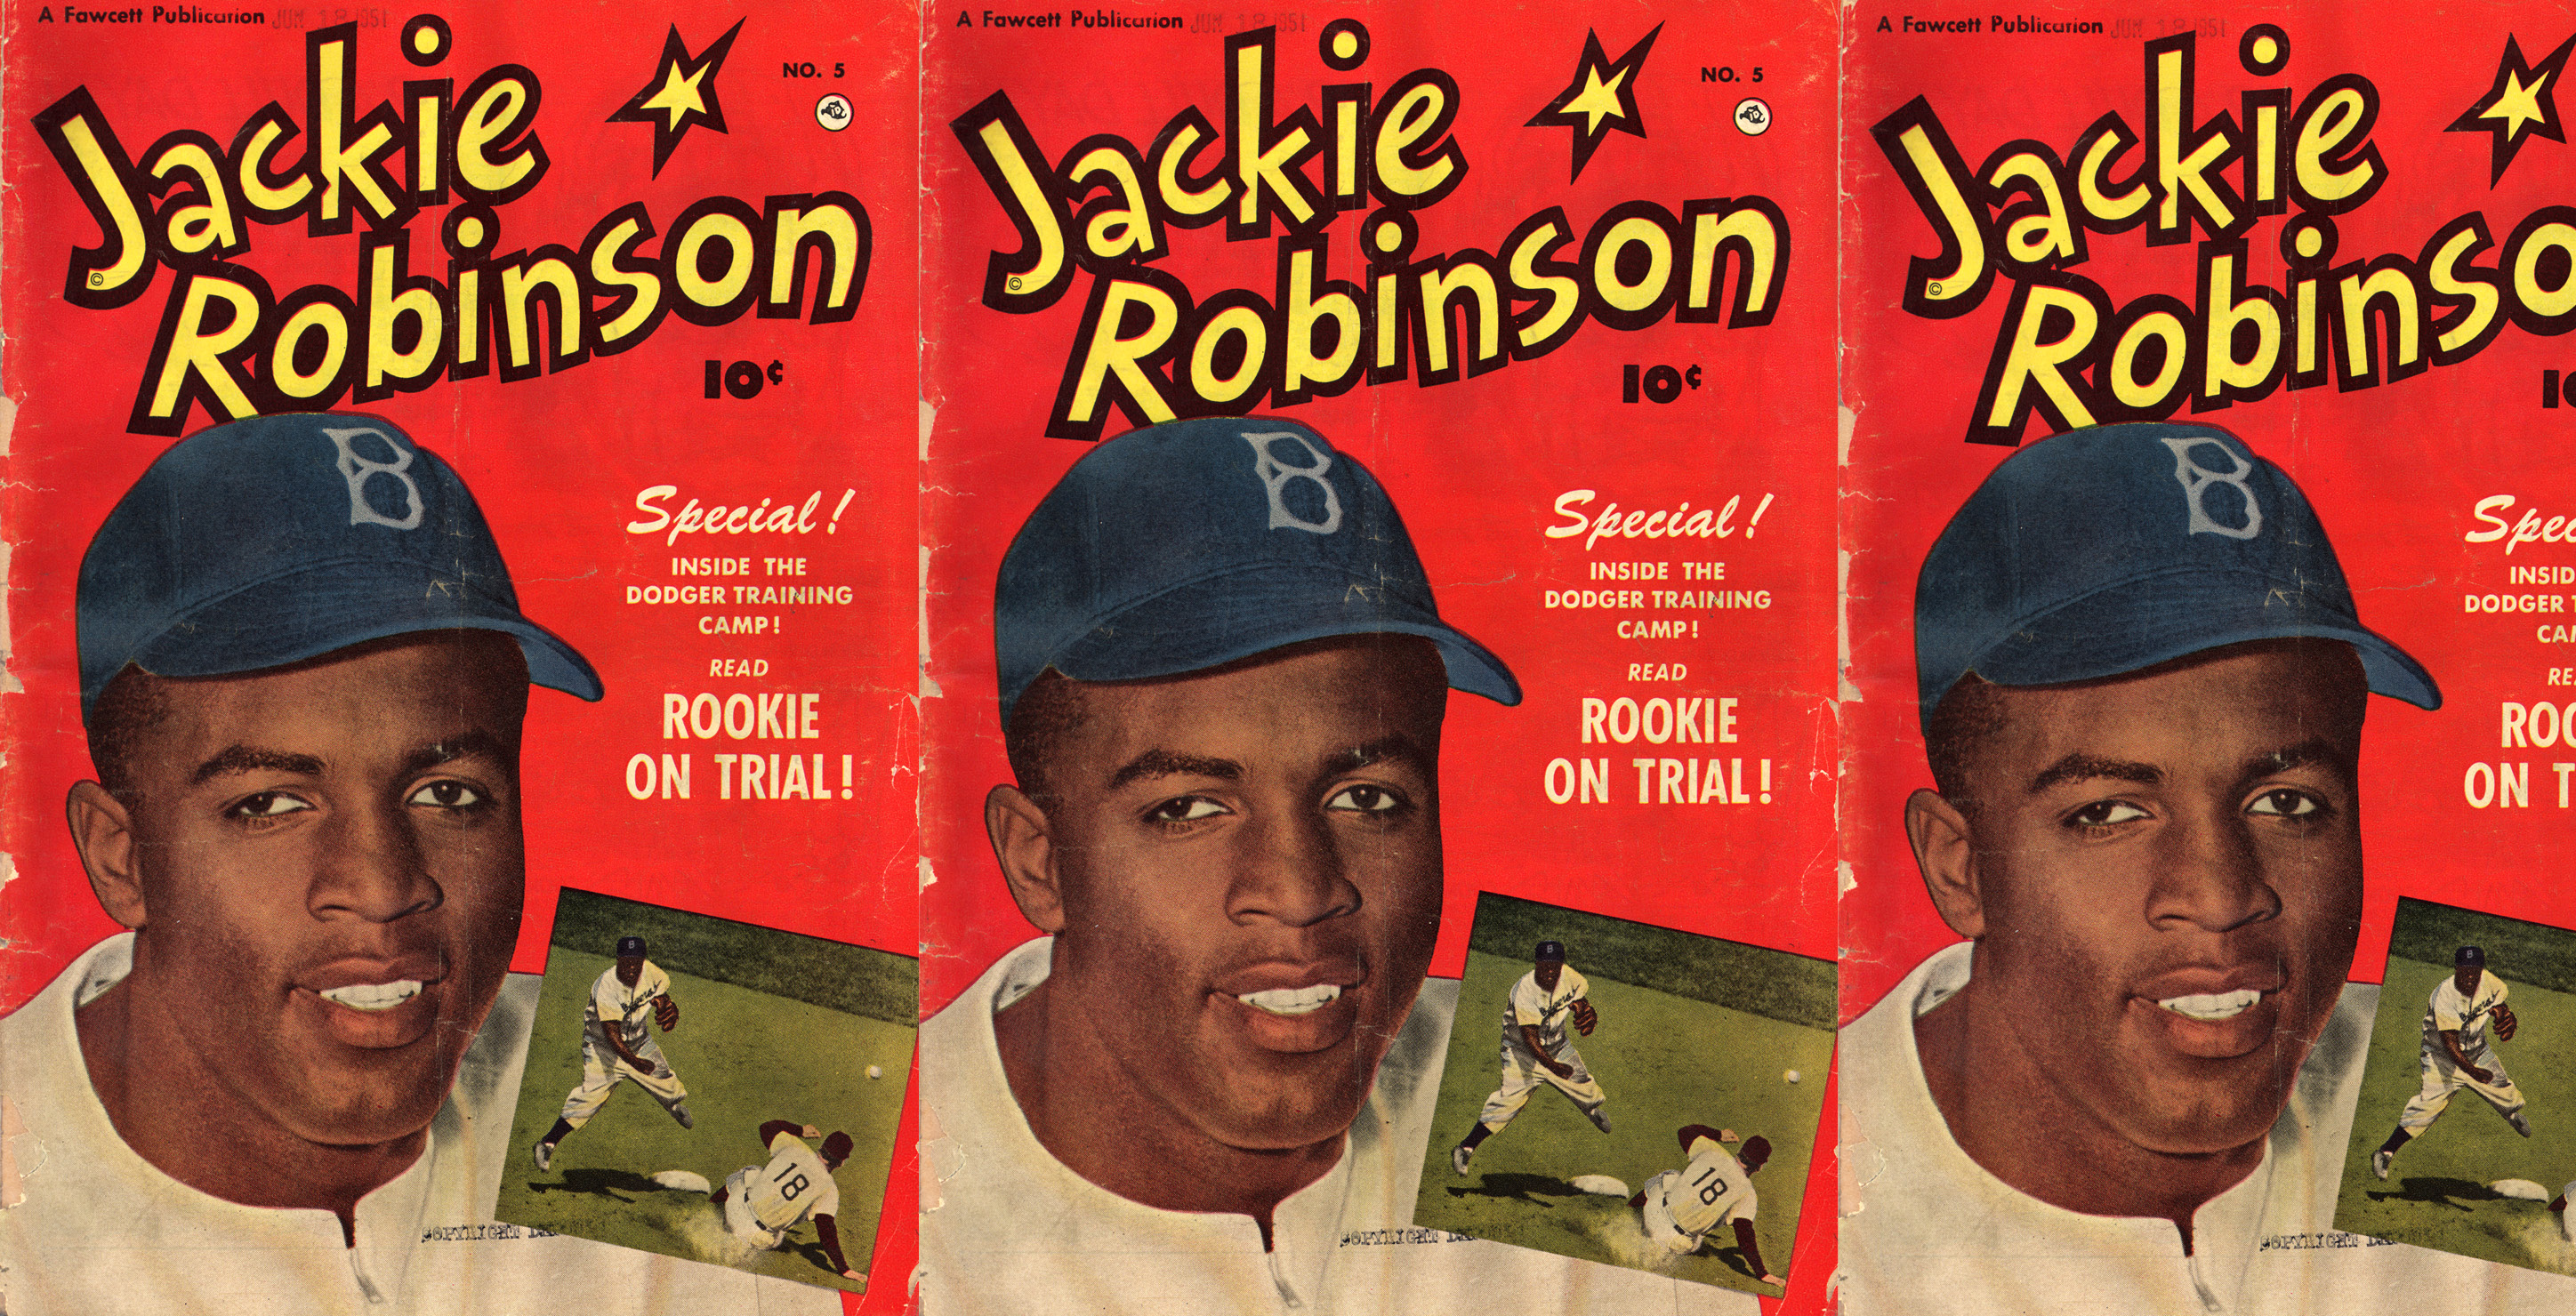 Cover of a magazine featuring the baseball player Jackie Robinson